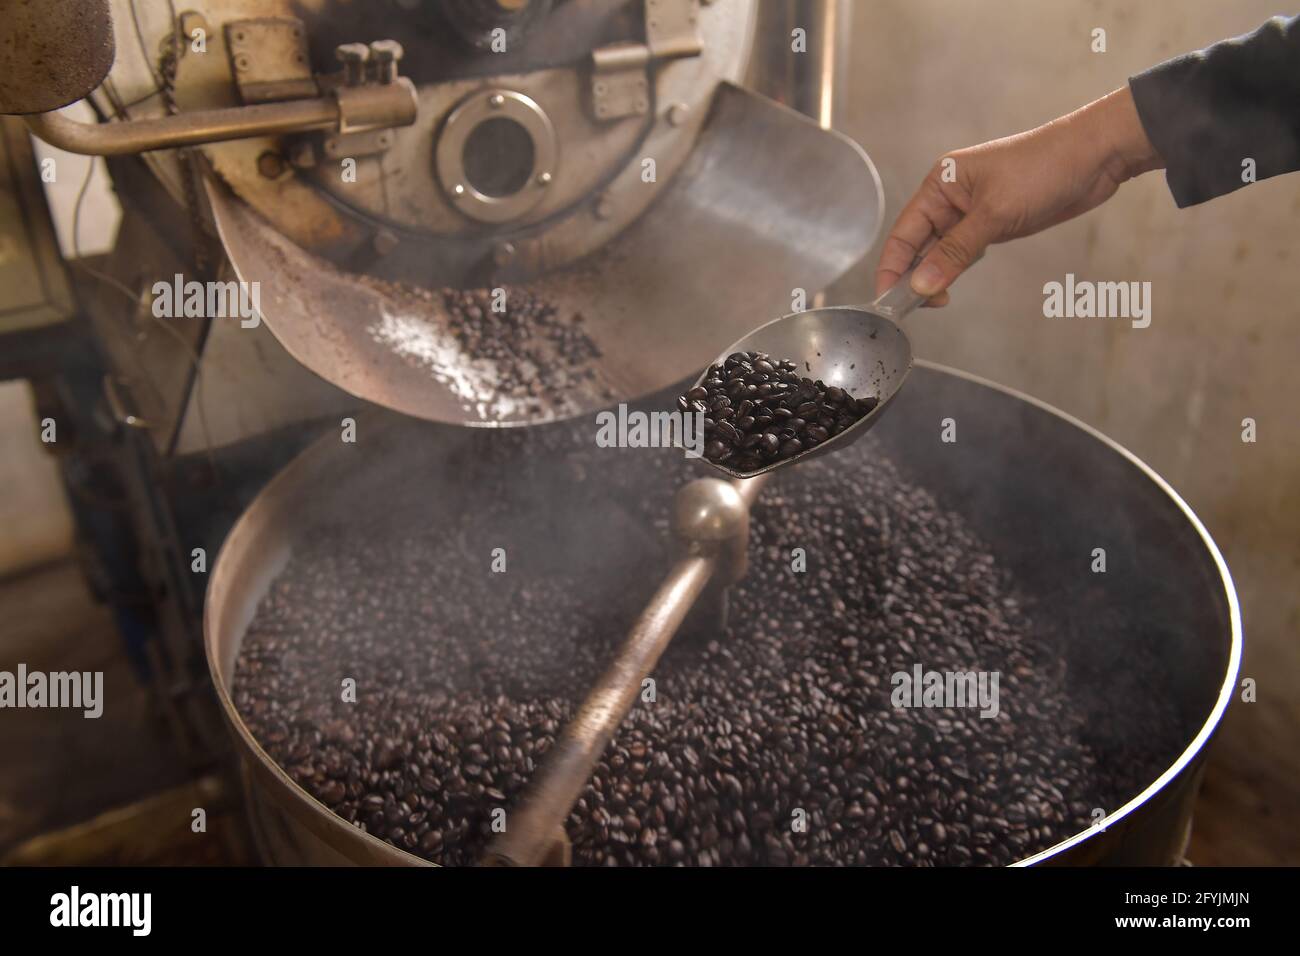 Close-up of a woman roasting coffee beans Stock Photo